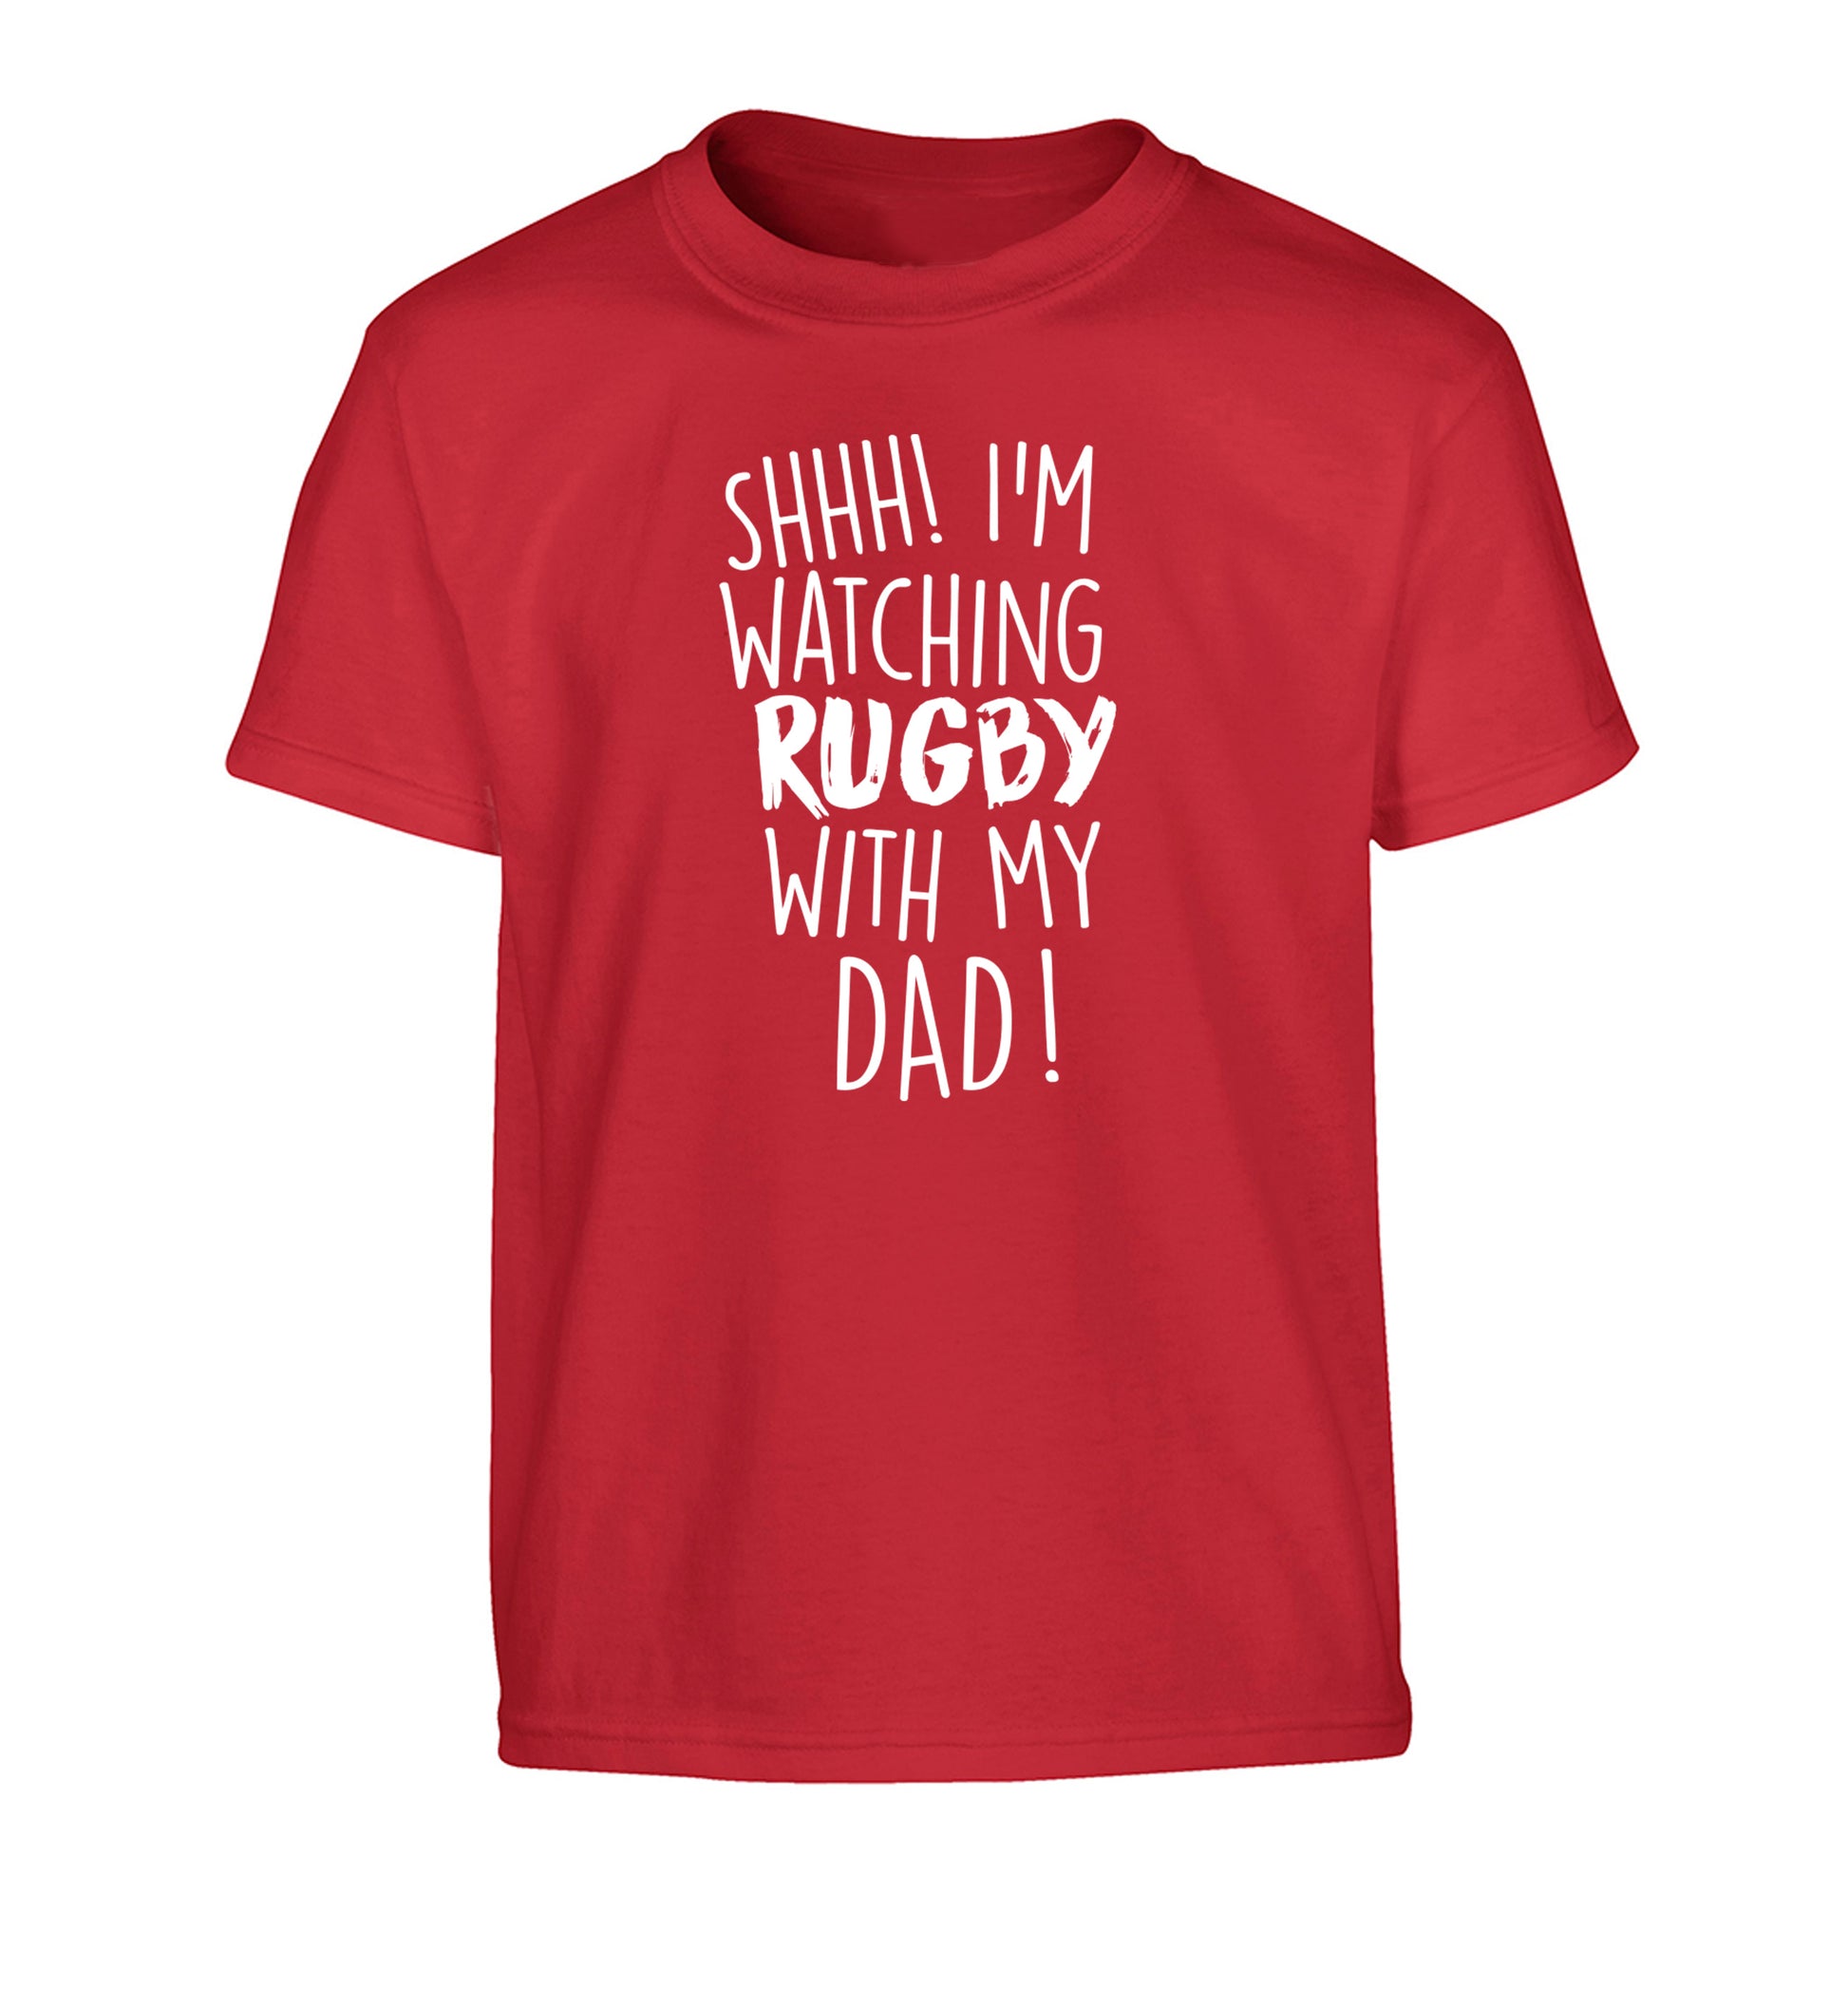 Shh... I'm watching rugby with my dad Children's red Tshirt 12-13 Years